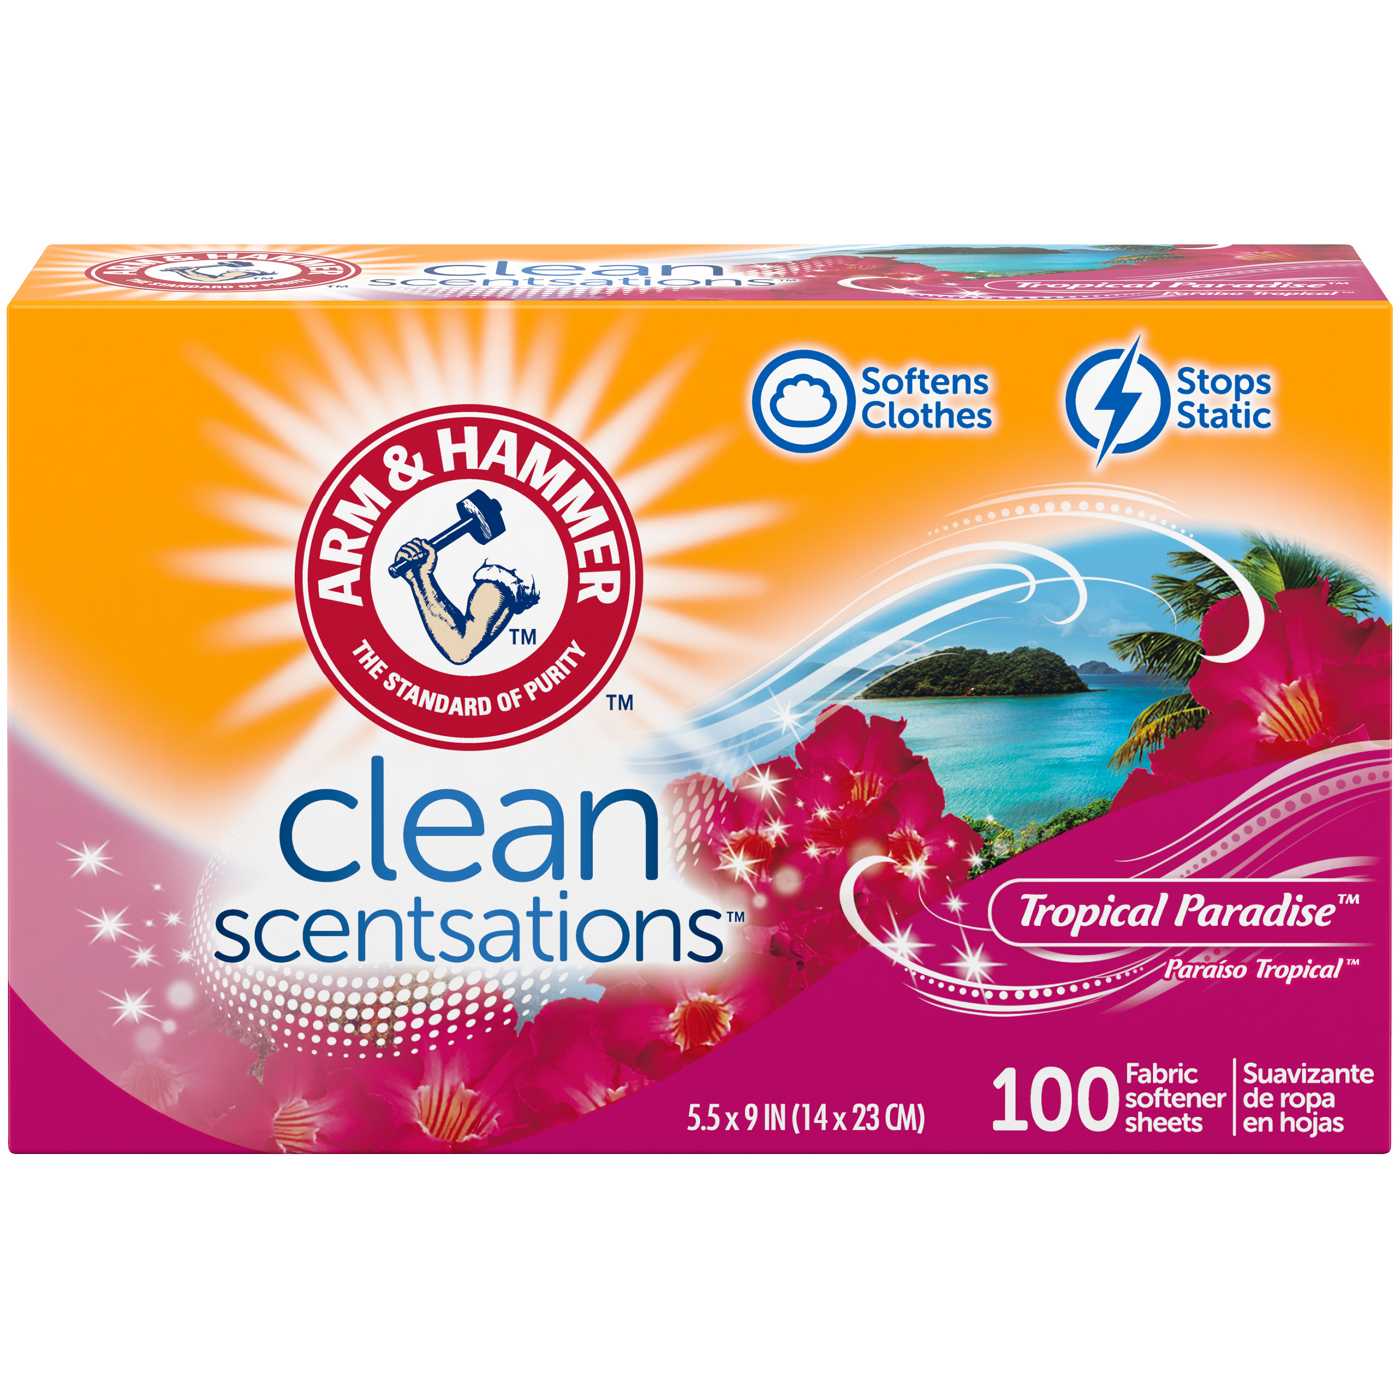 Arm & Hammer Clean Scentsations Fabric Softener Dryer Sheets - Tropical Paradise; image 1 of 2